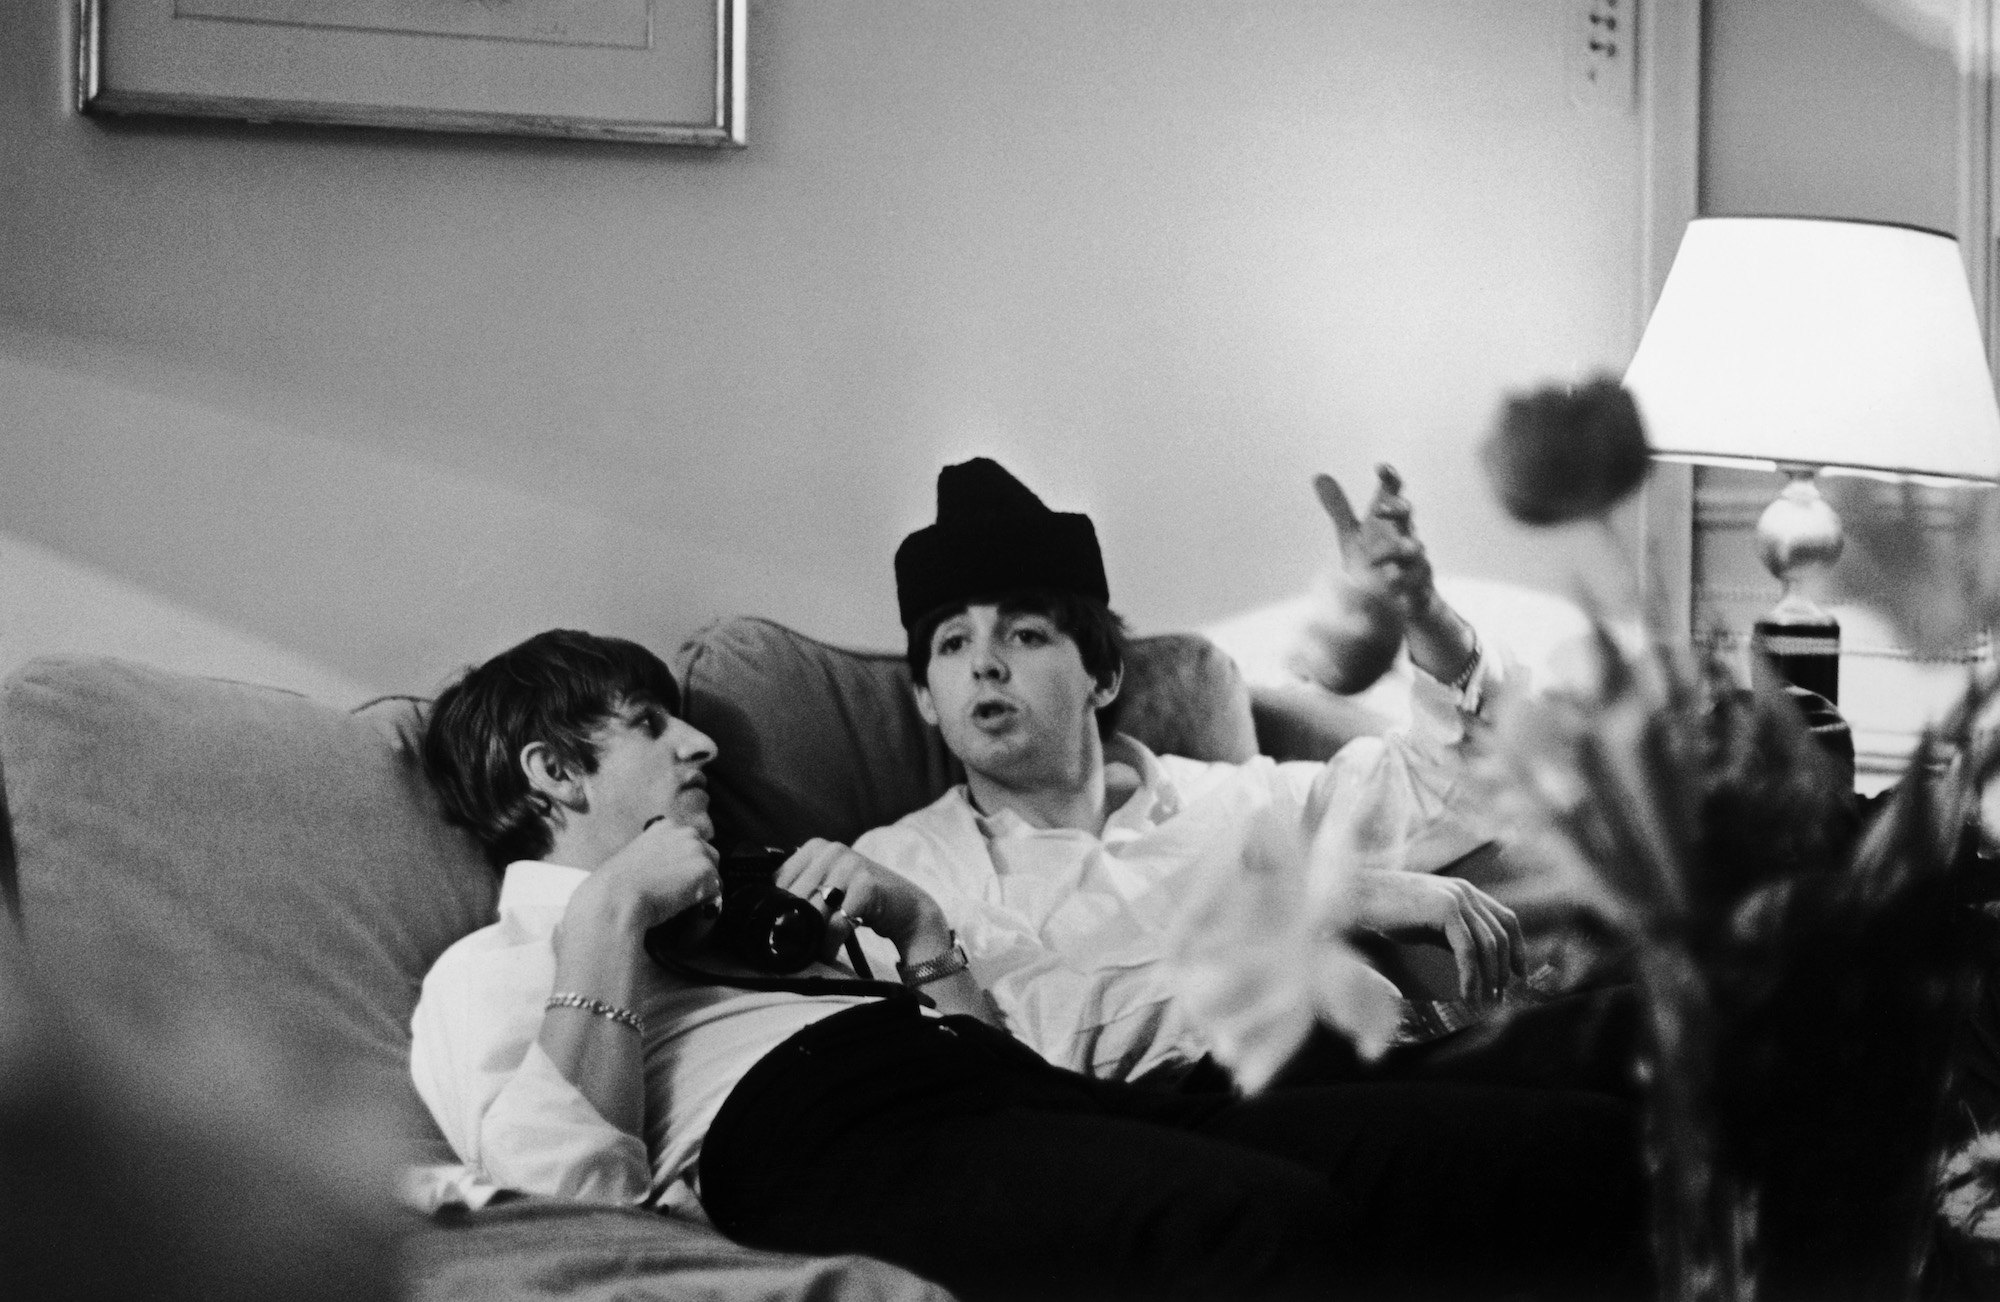 Ringo Starr and Paul McCartney in a Paris hotel room